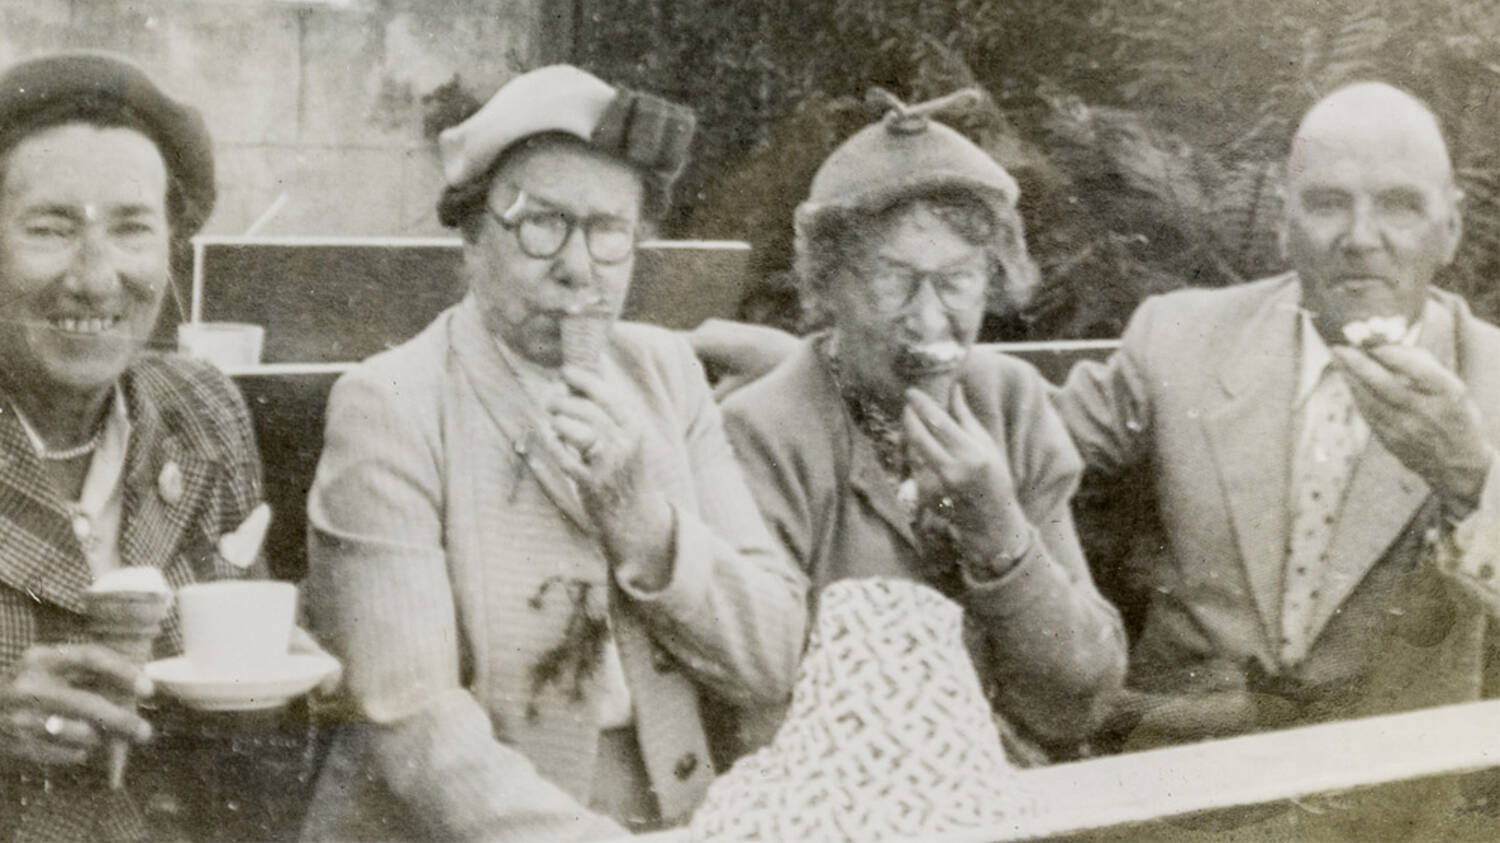 A black and white photograph of three women and a man sitting on a bench outdoors. They are having cups of tea or ice creams (Miss Toward on the far left has both!).